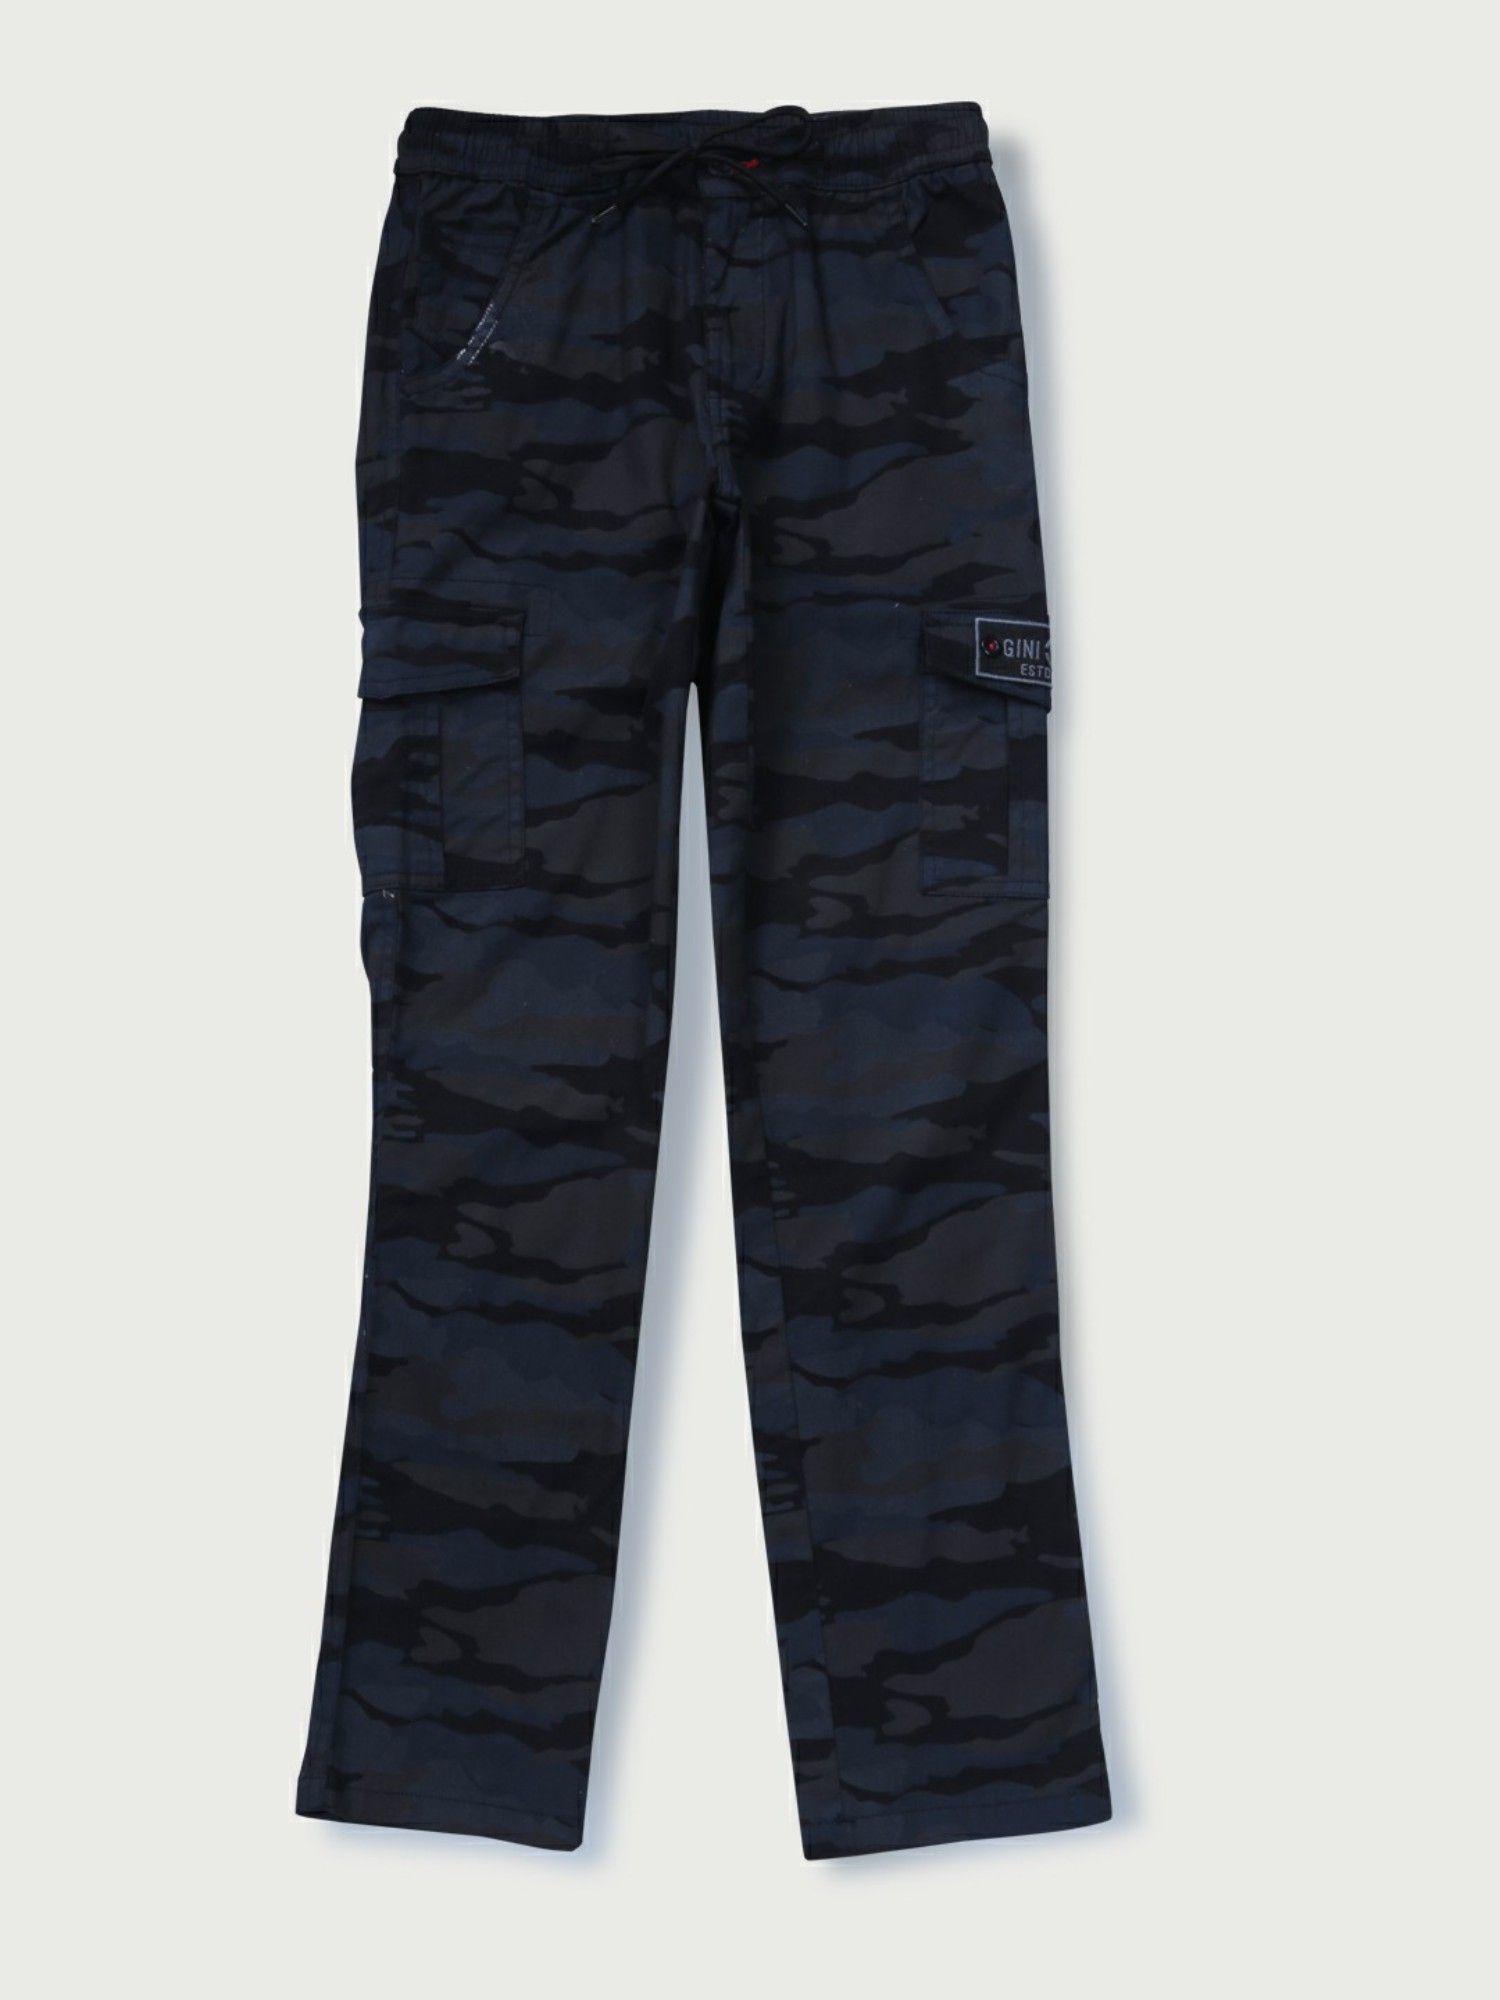 boys navy blue cotton camouflage trouser